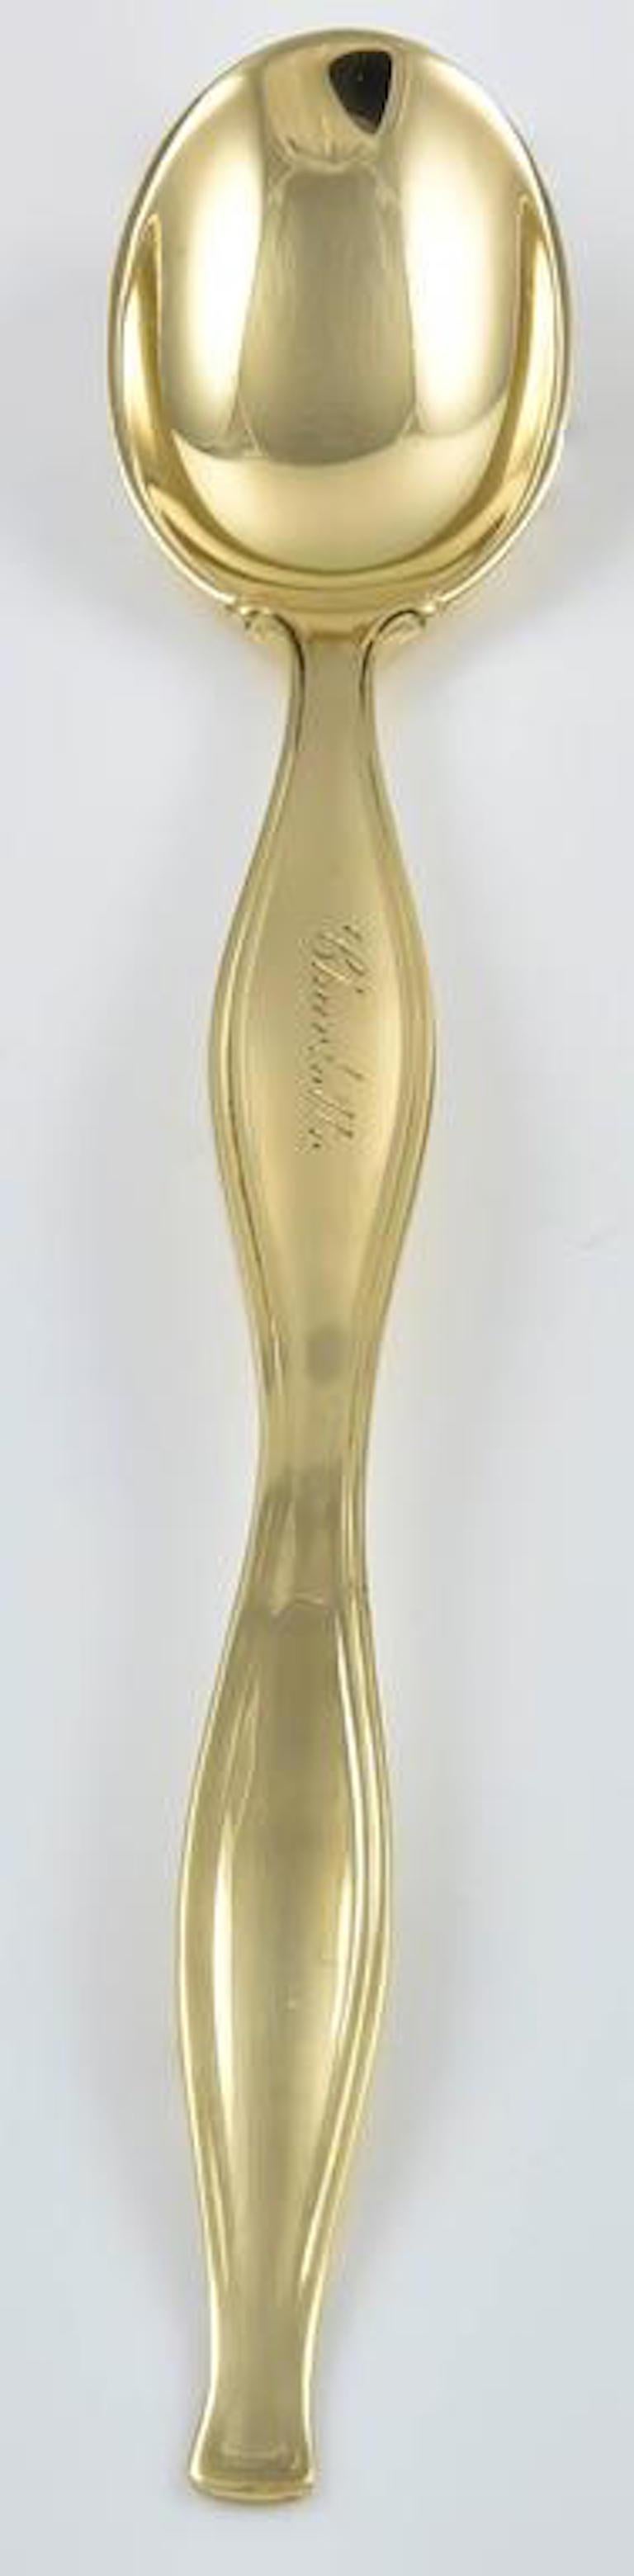 baby gold spoon